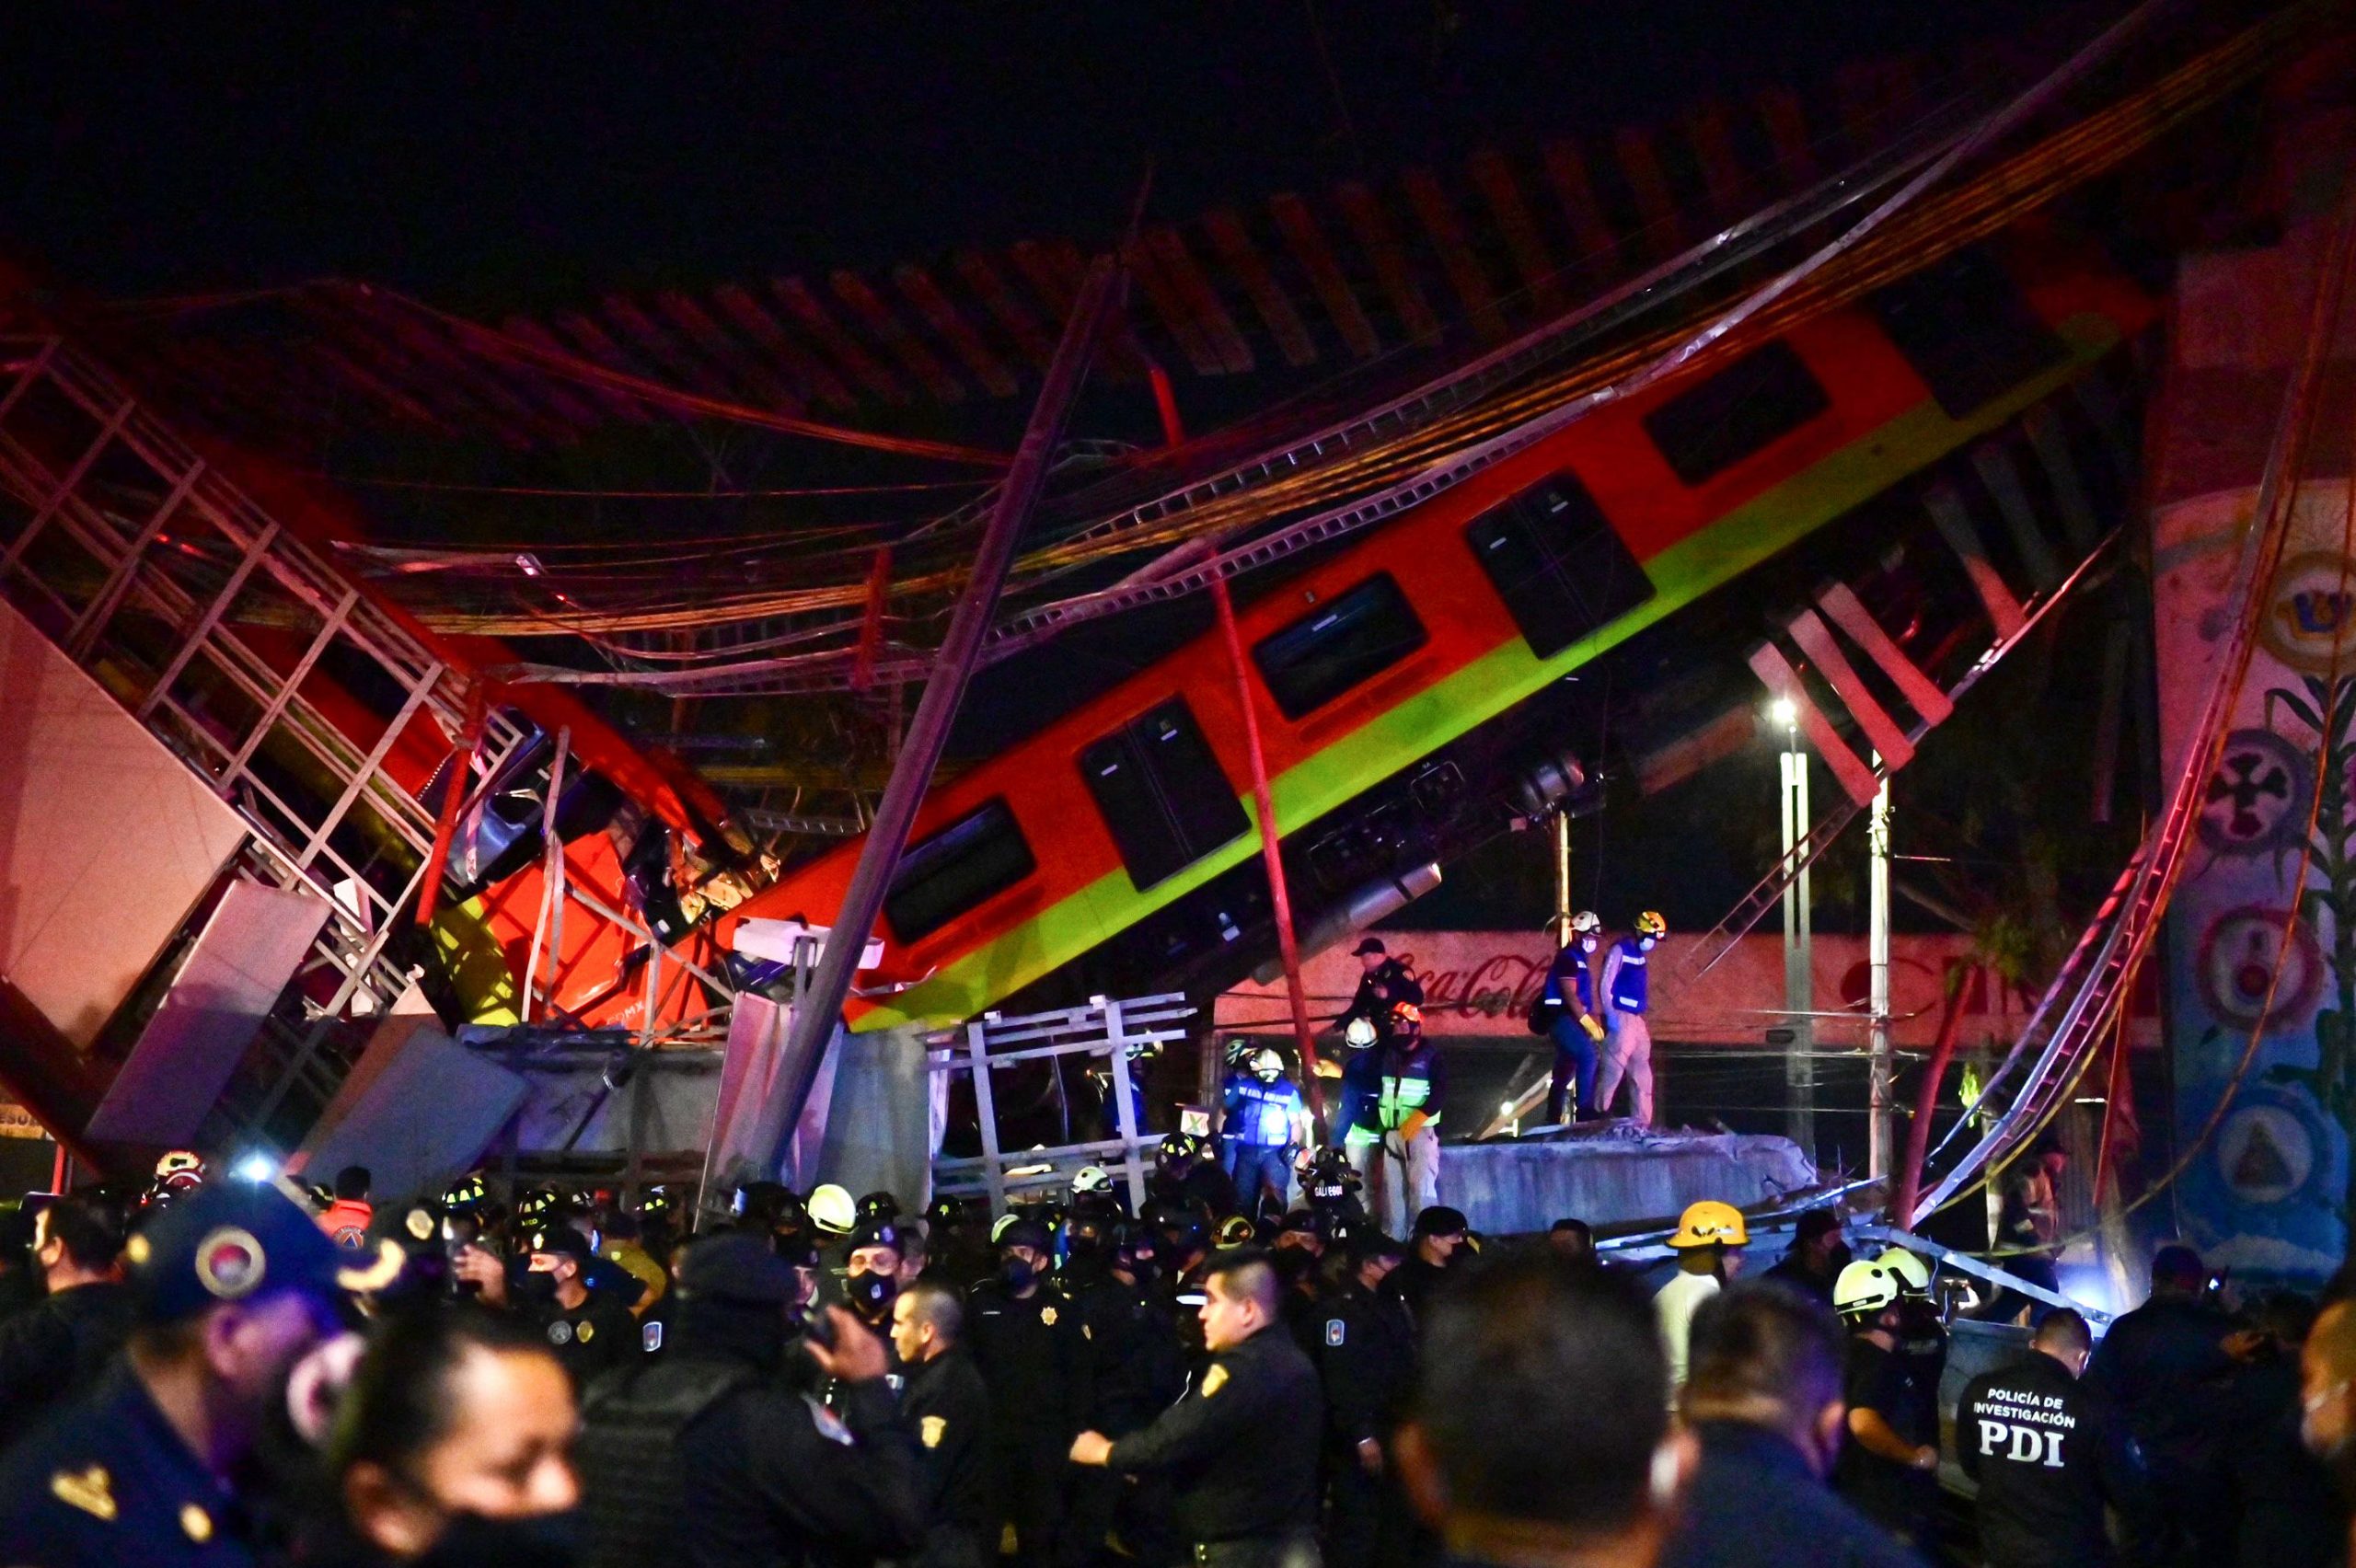 20 dead, dozens hurt as elevated metro collapses in Mexico